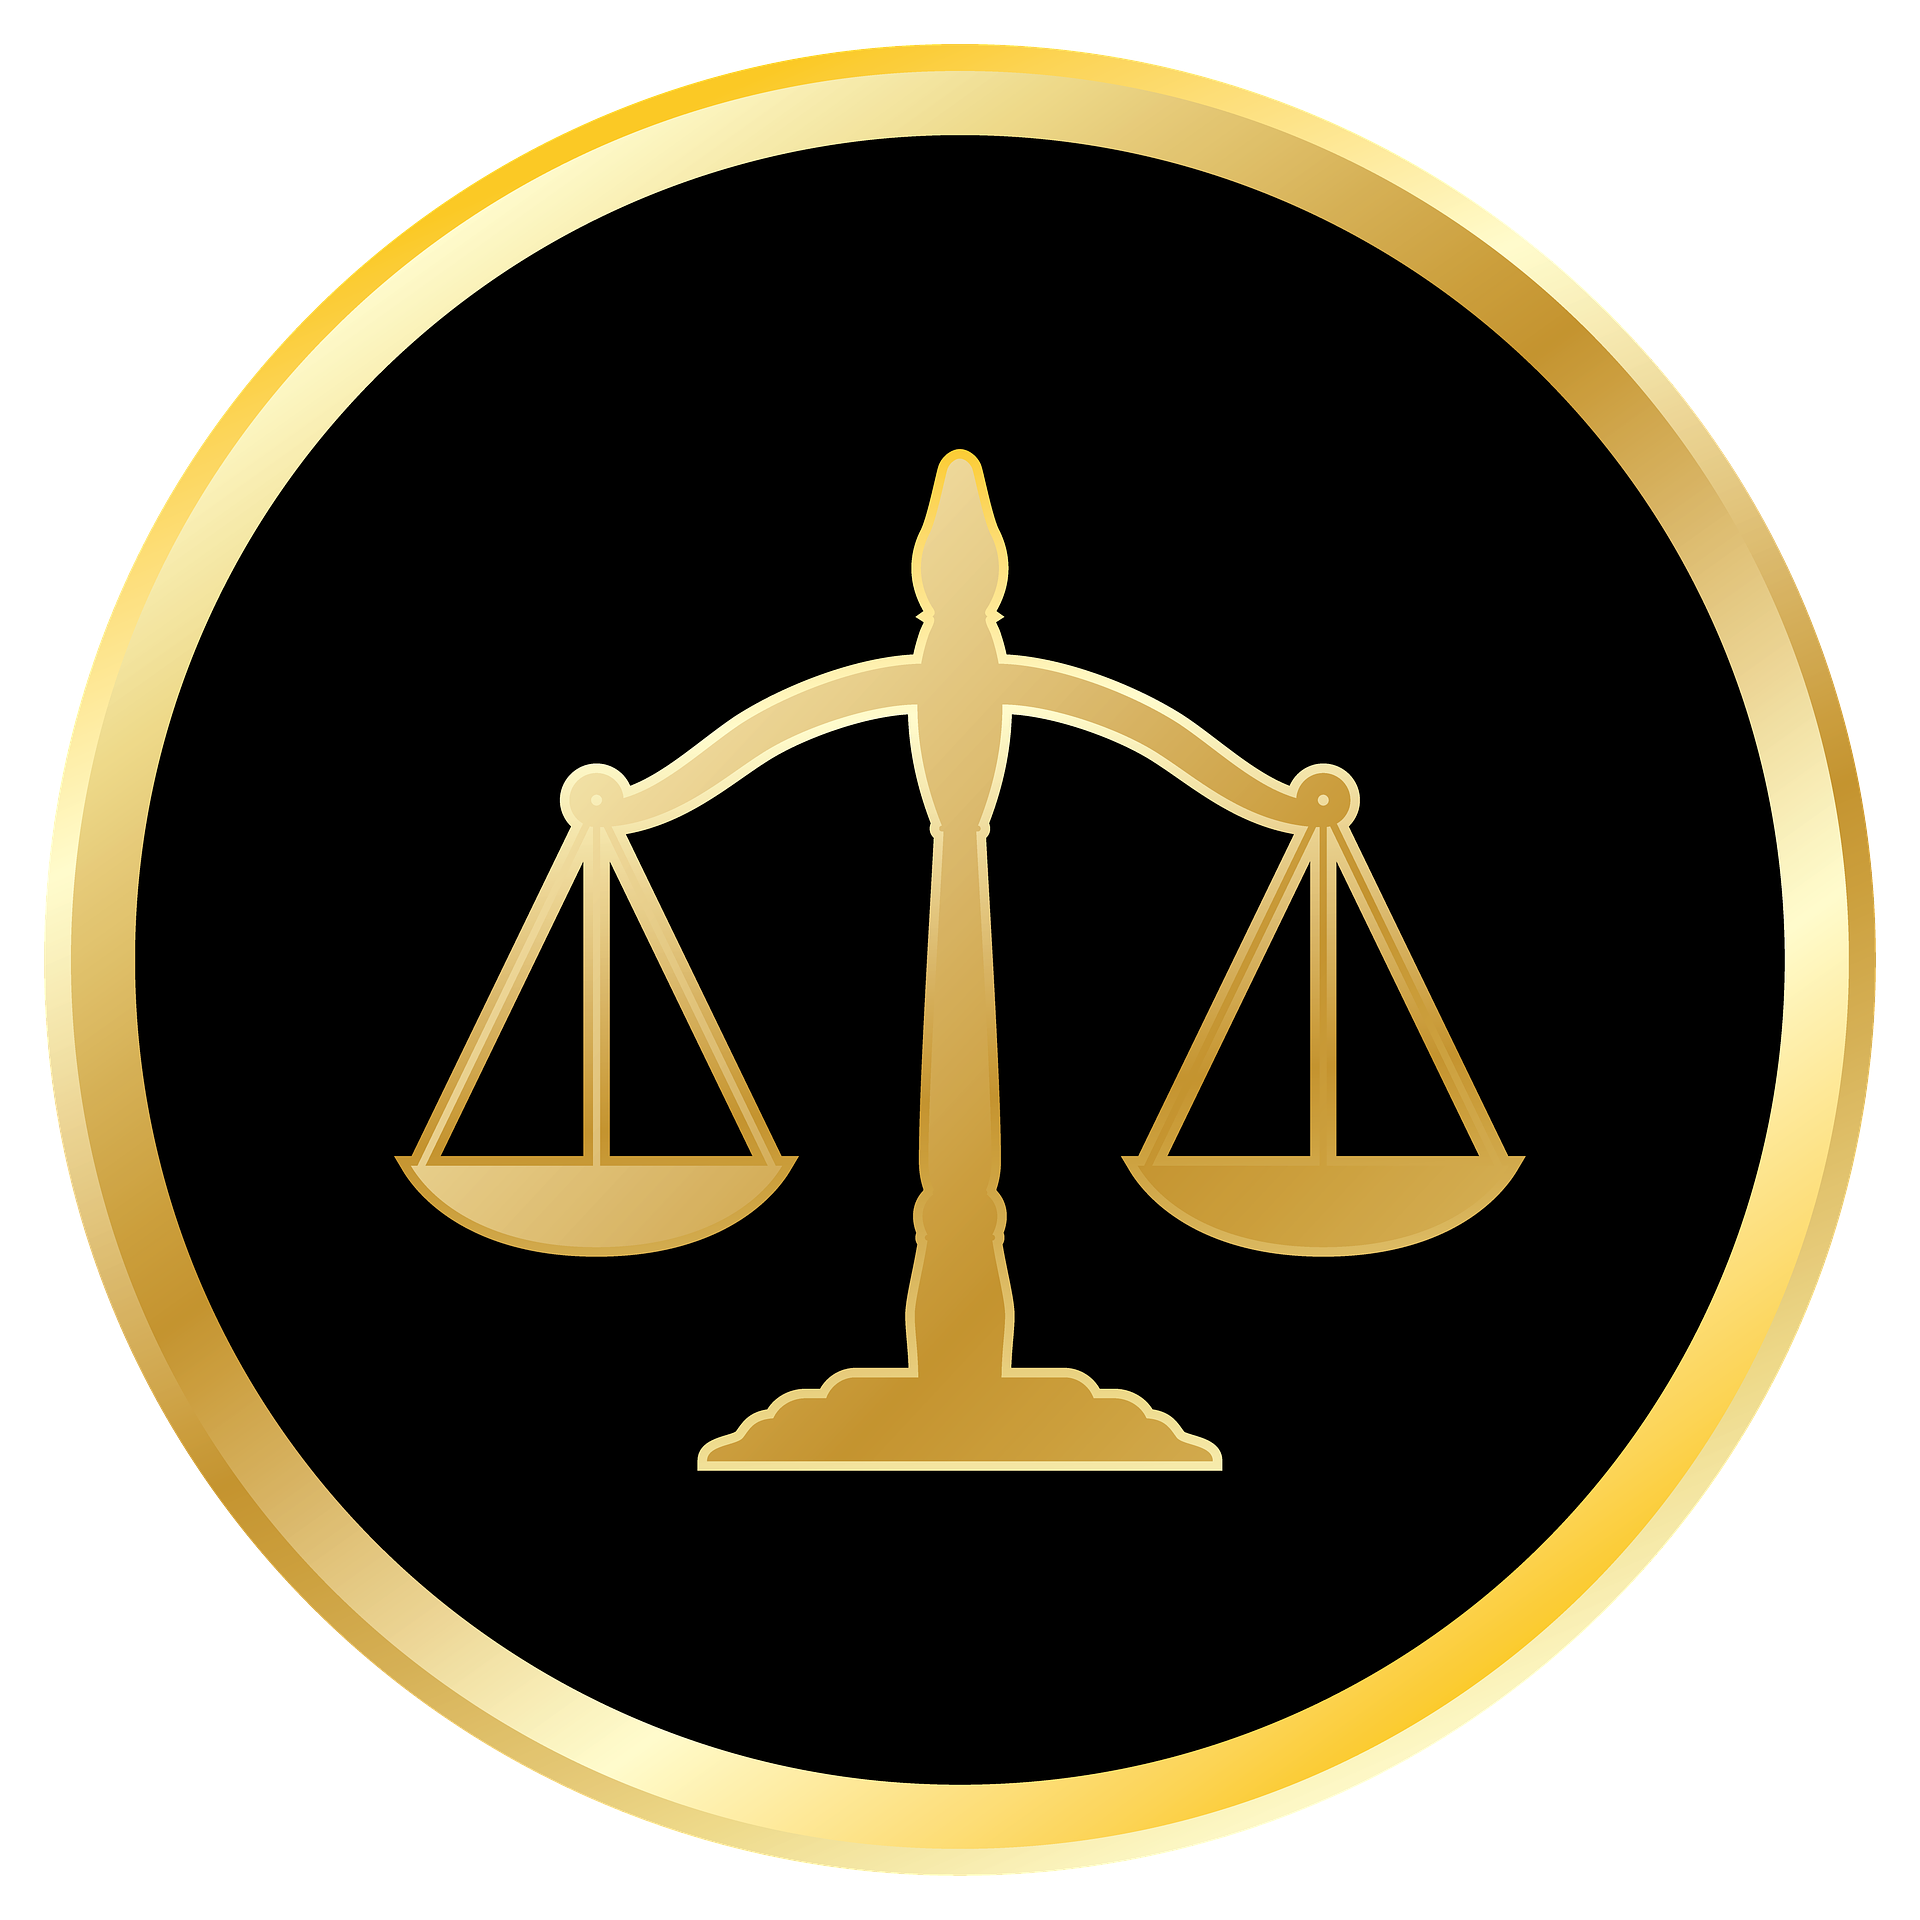 scales-of-justice-g1bced8446_1920.png